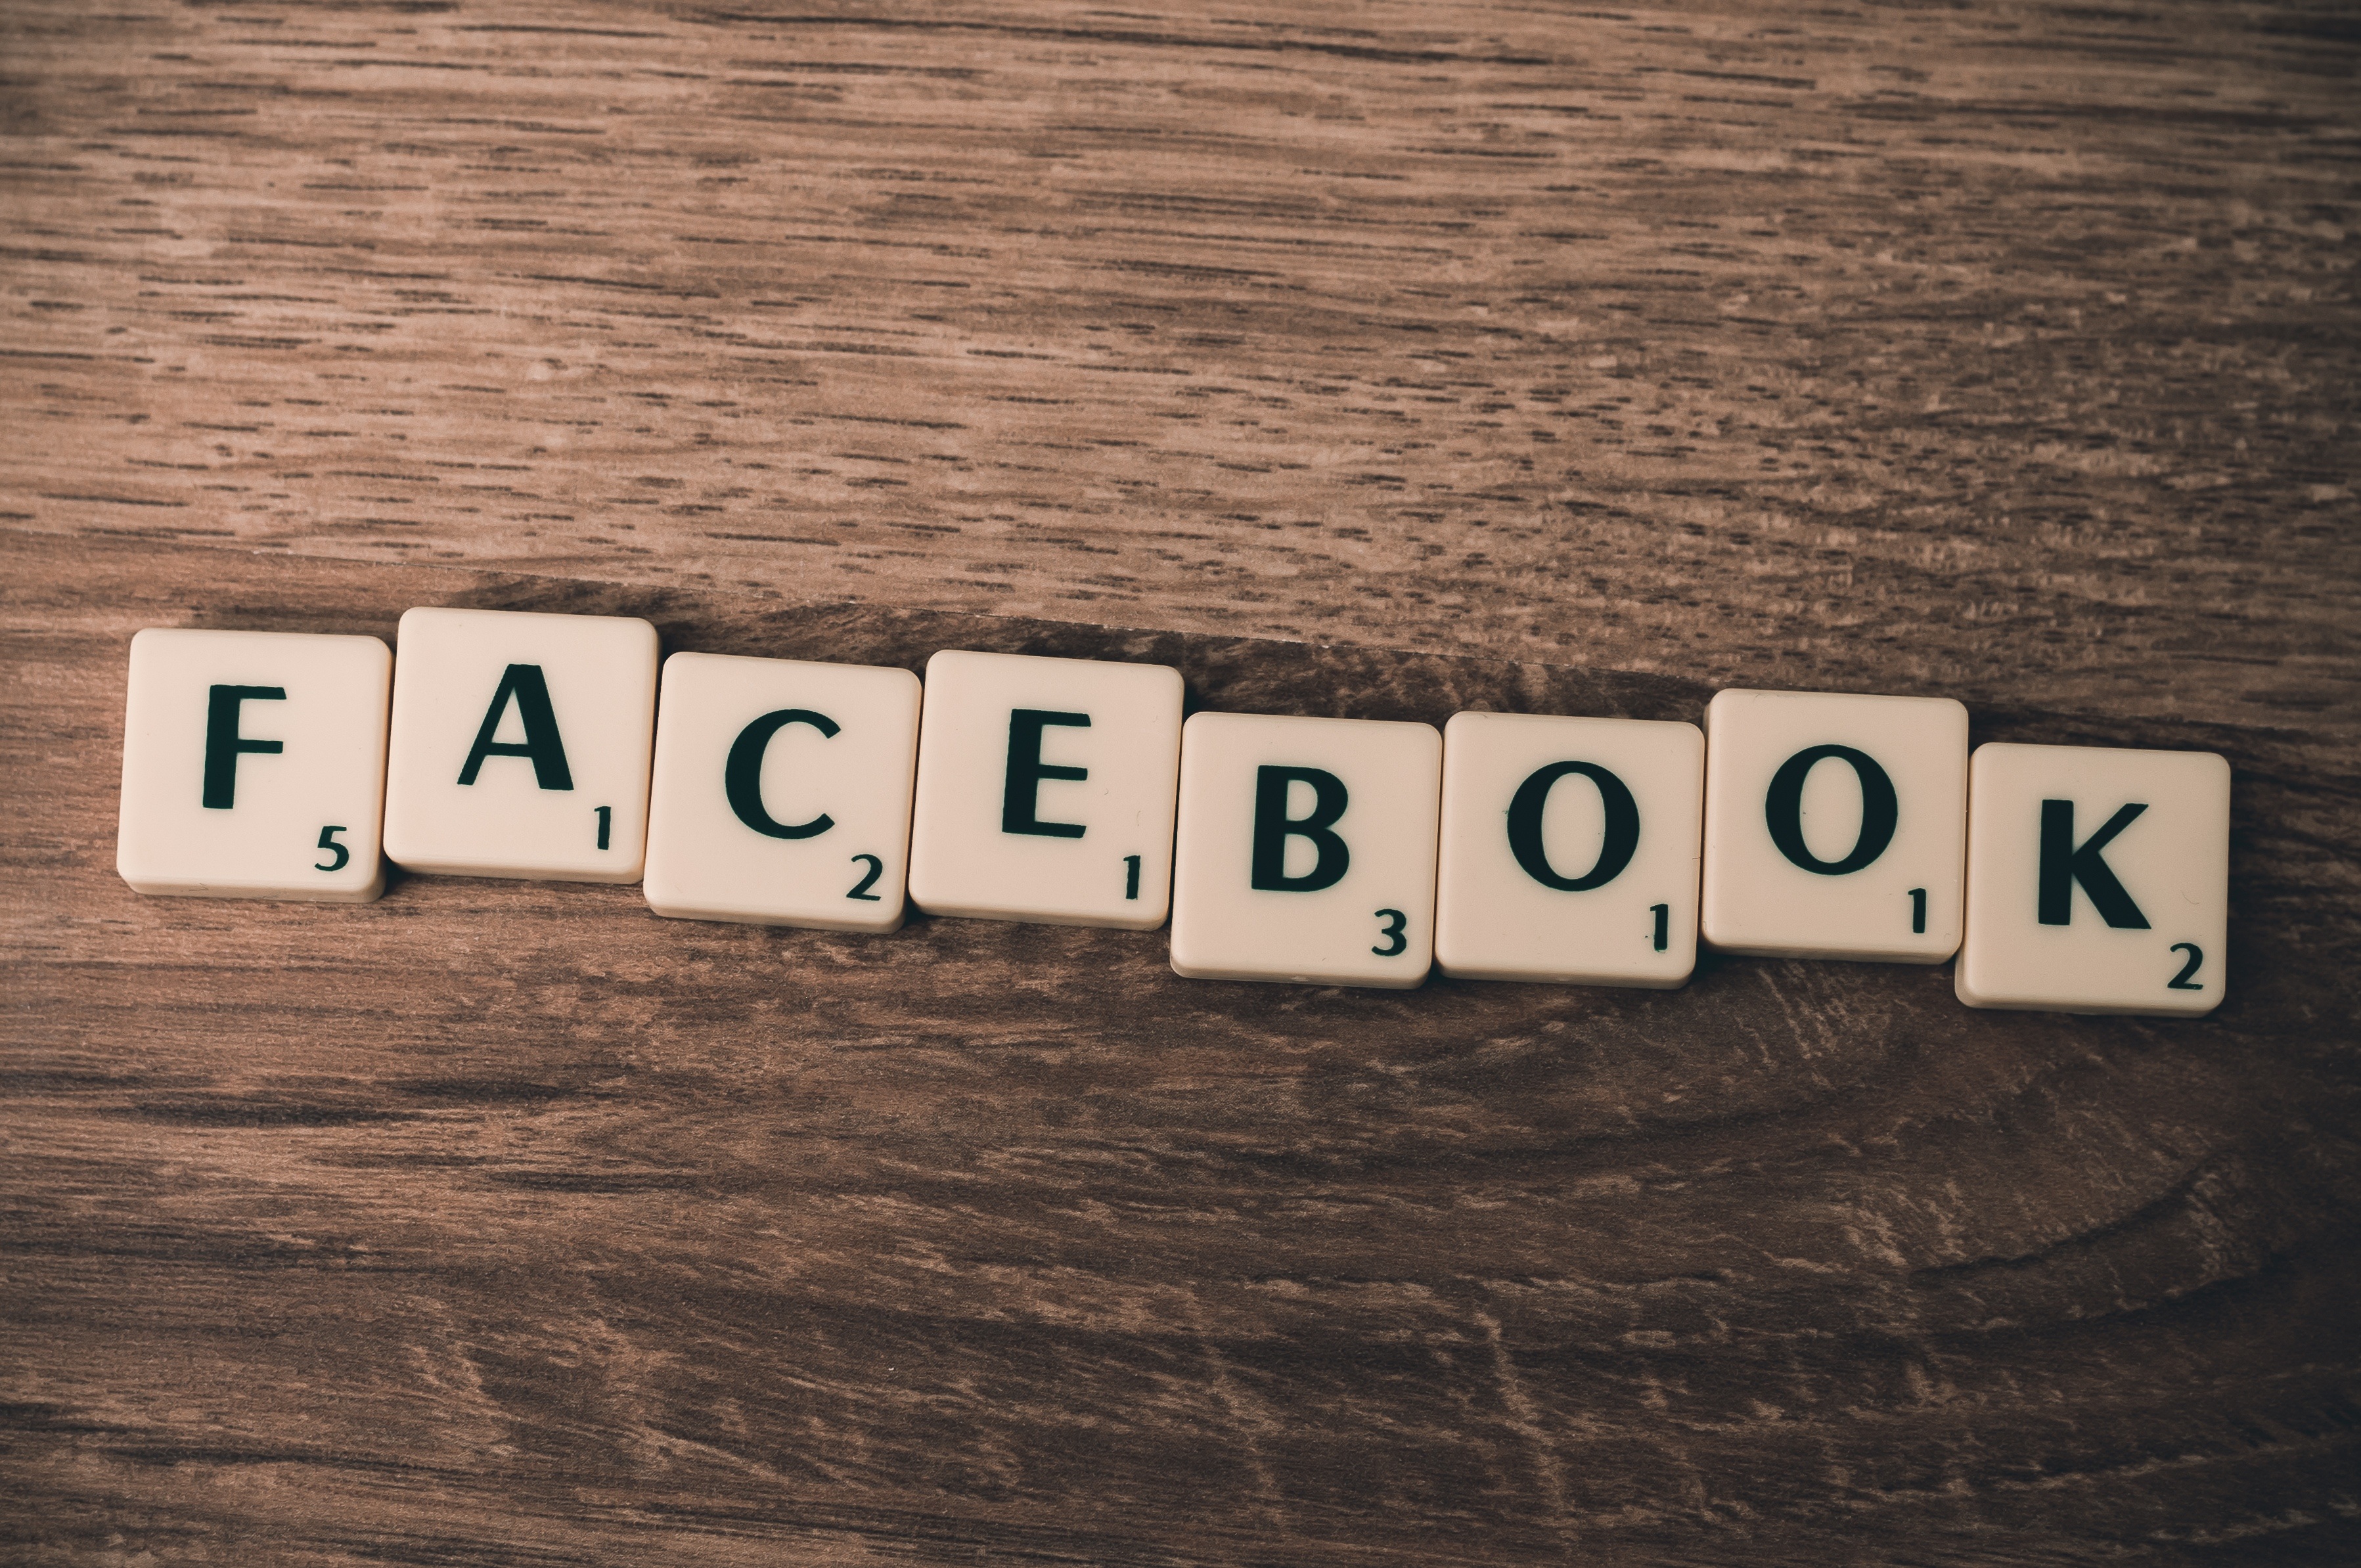 Facebook spelt with scrabble letters by FirmBee